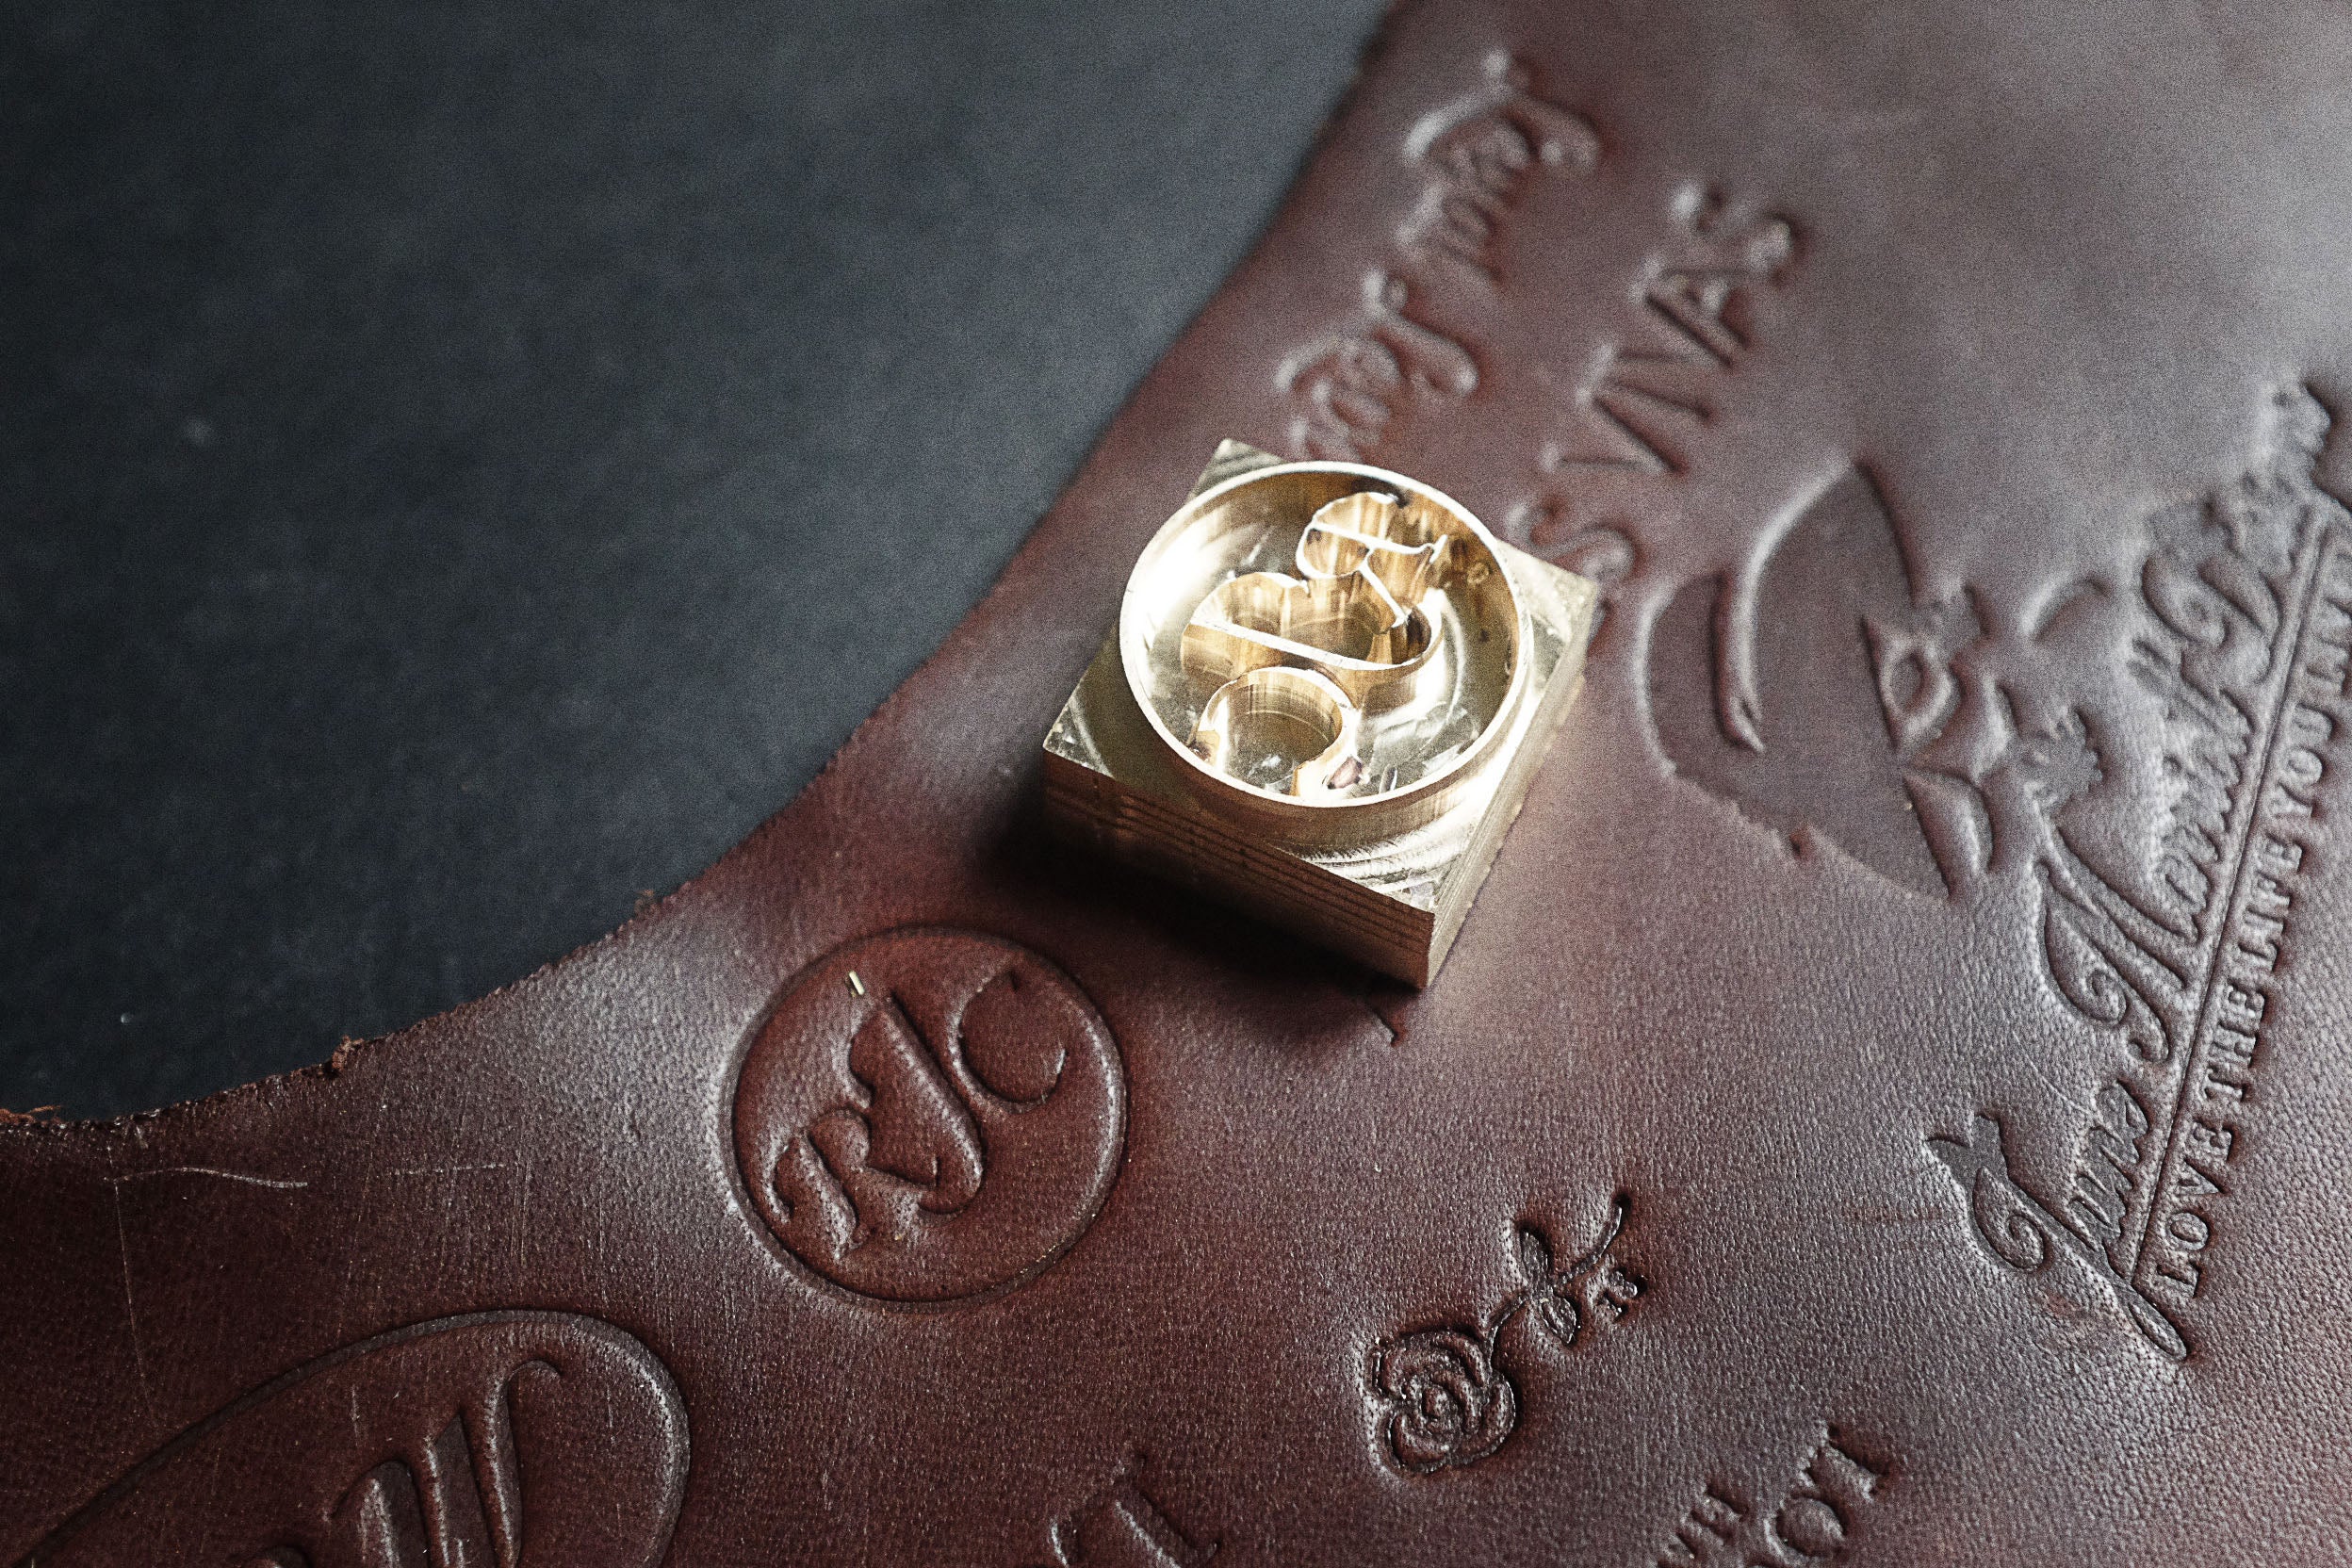 Get your custom-stamp made for your leather projects on Am-leathercraft.com